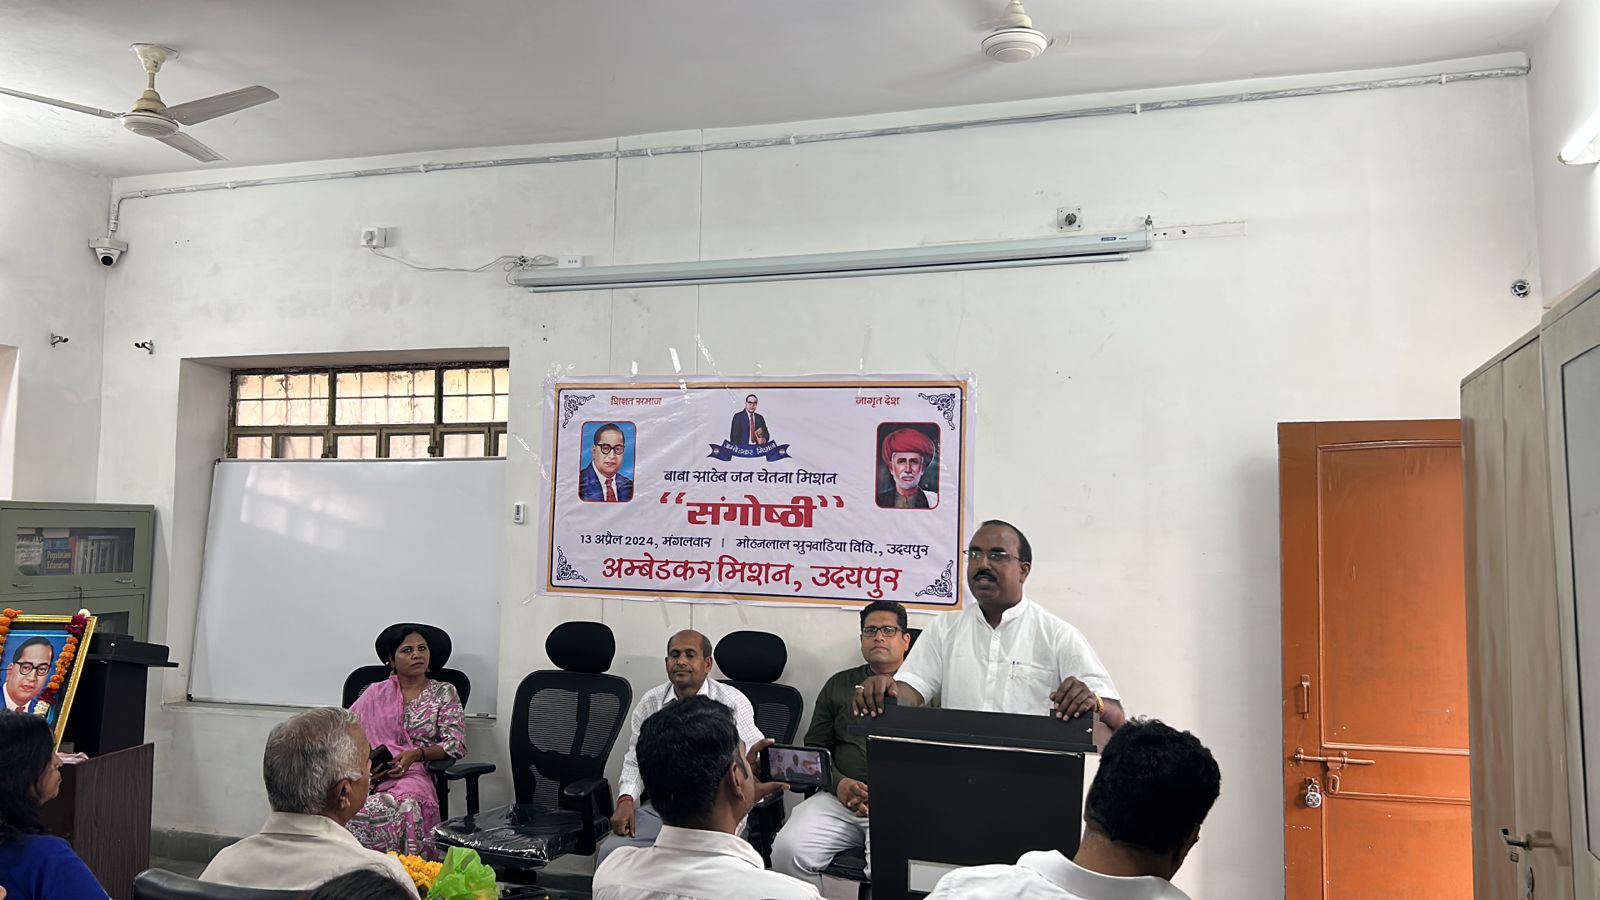 Seminar Organized by Ambedkar Mission on the Thoughts of Dr. Bhimrao Ambedkar